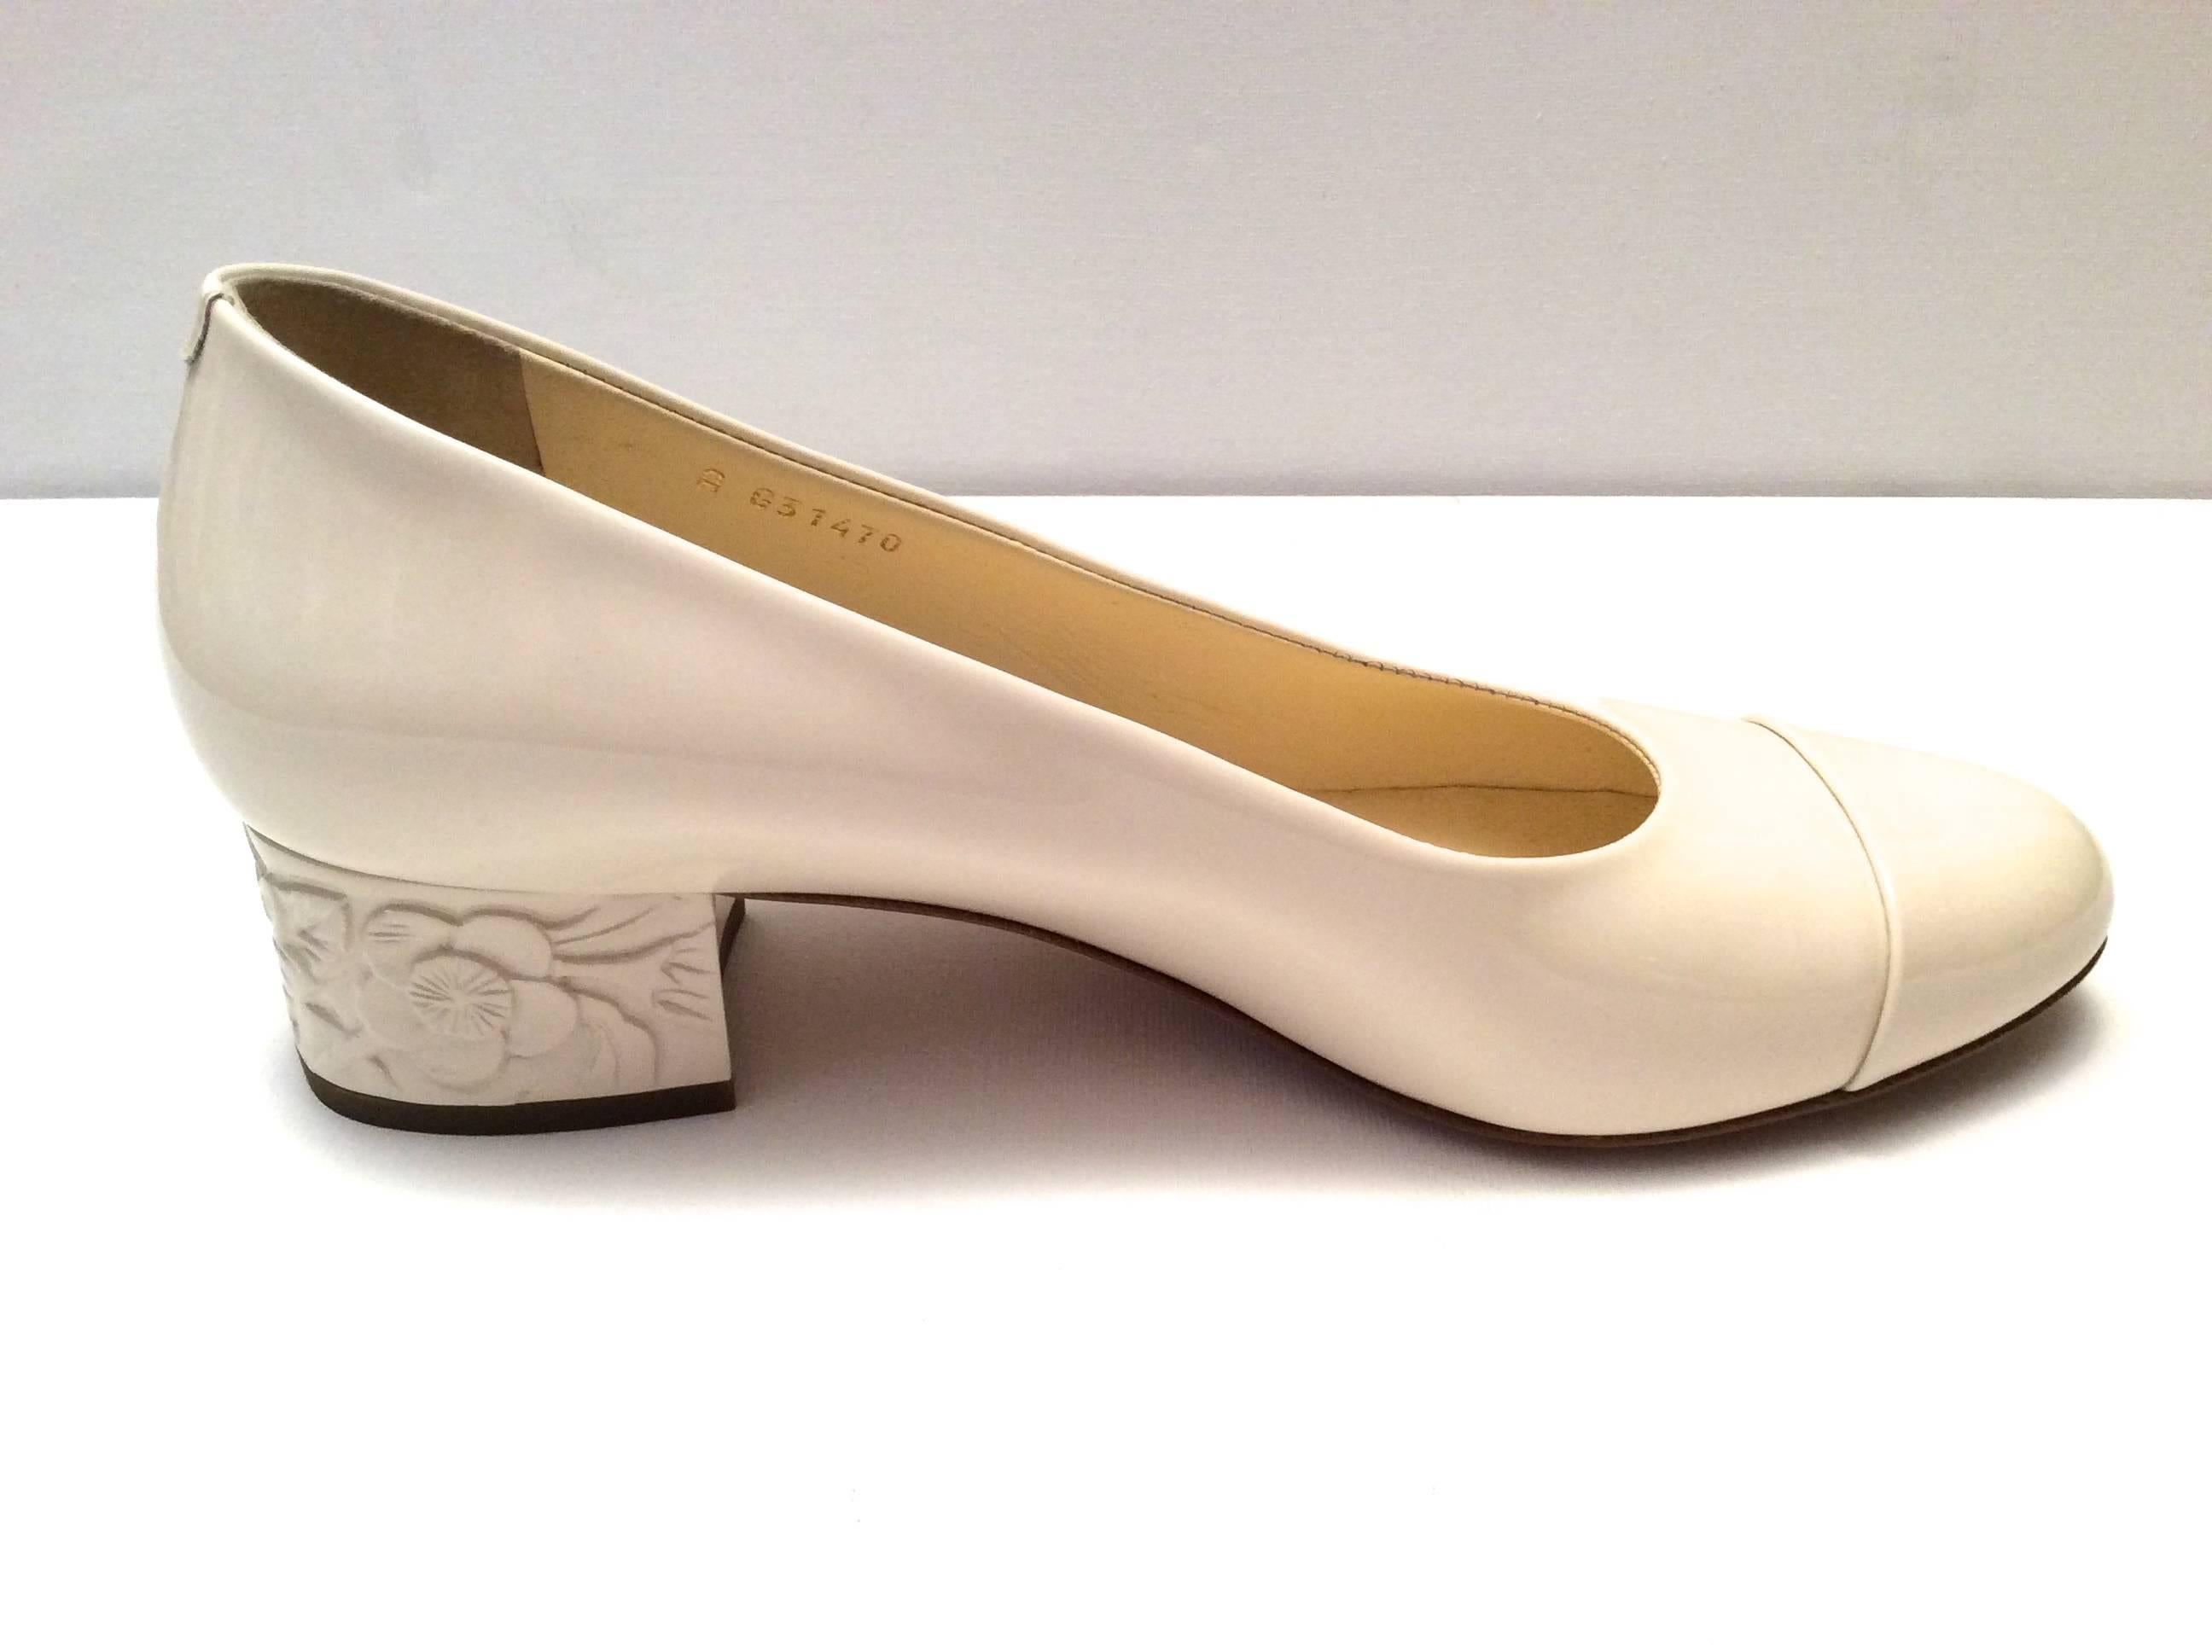 Chanel Pumps - Cream White Patent Leather - Embossed Flowers - Size 37.5 For Sale 1